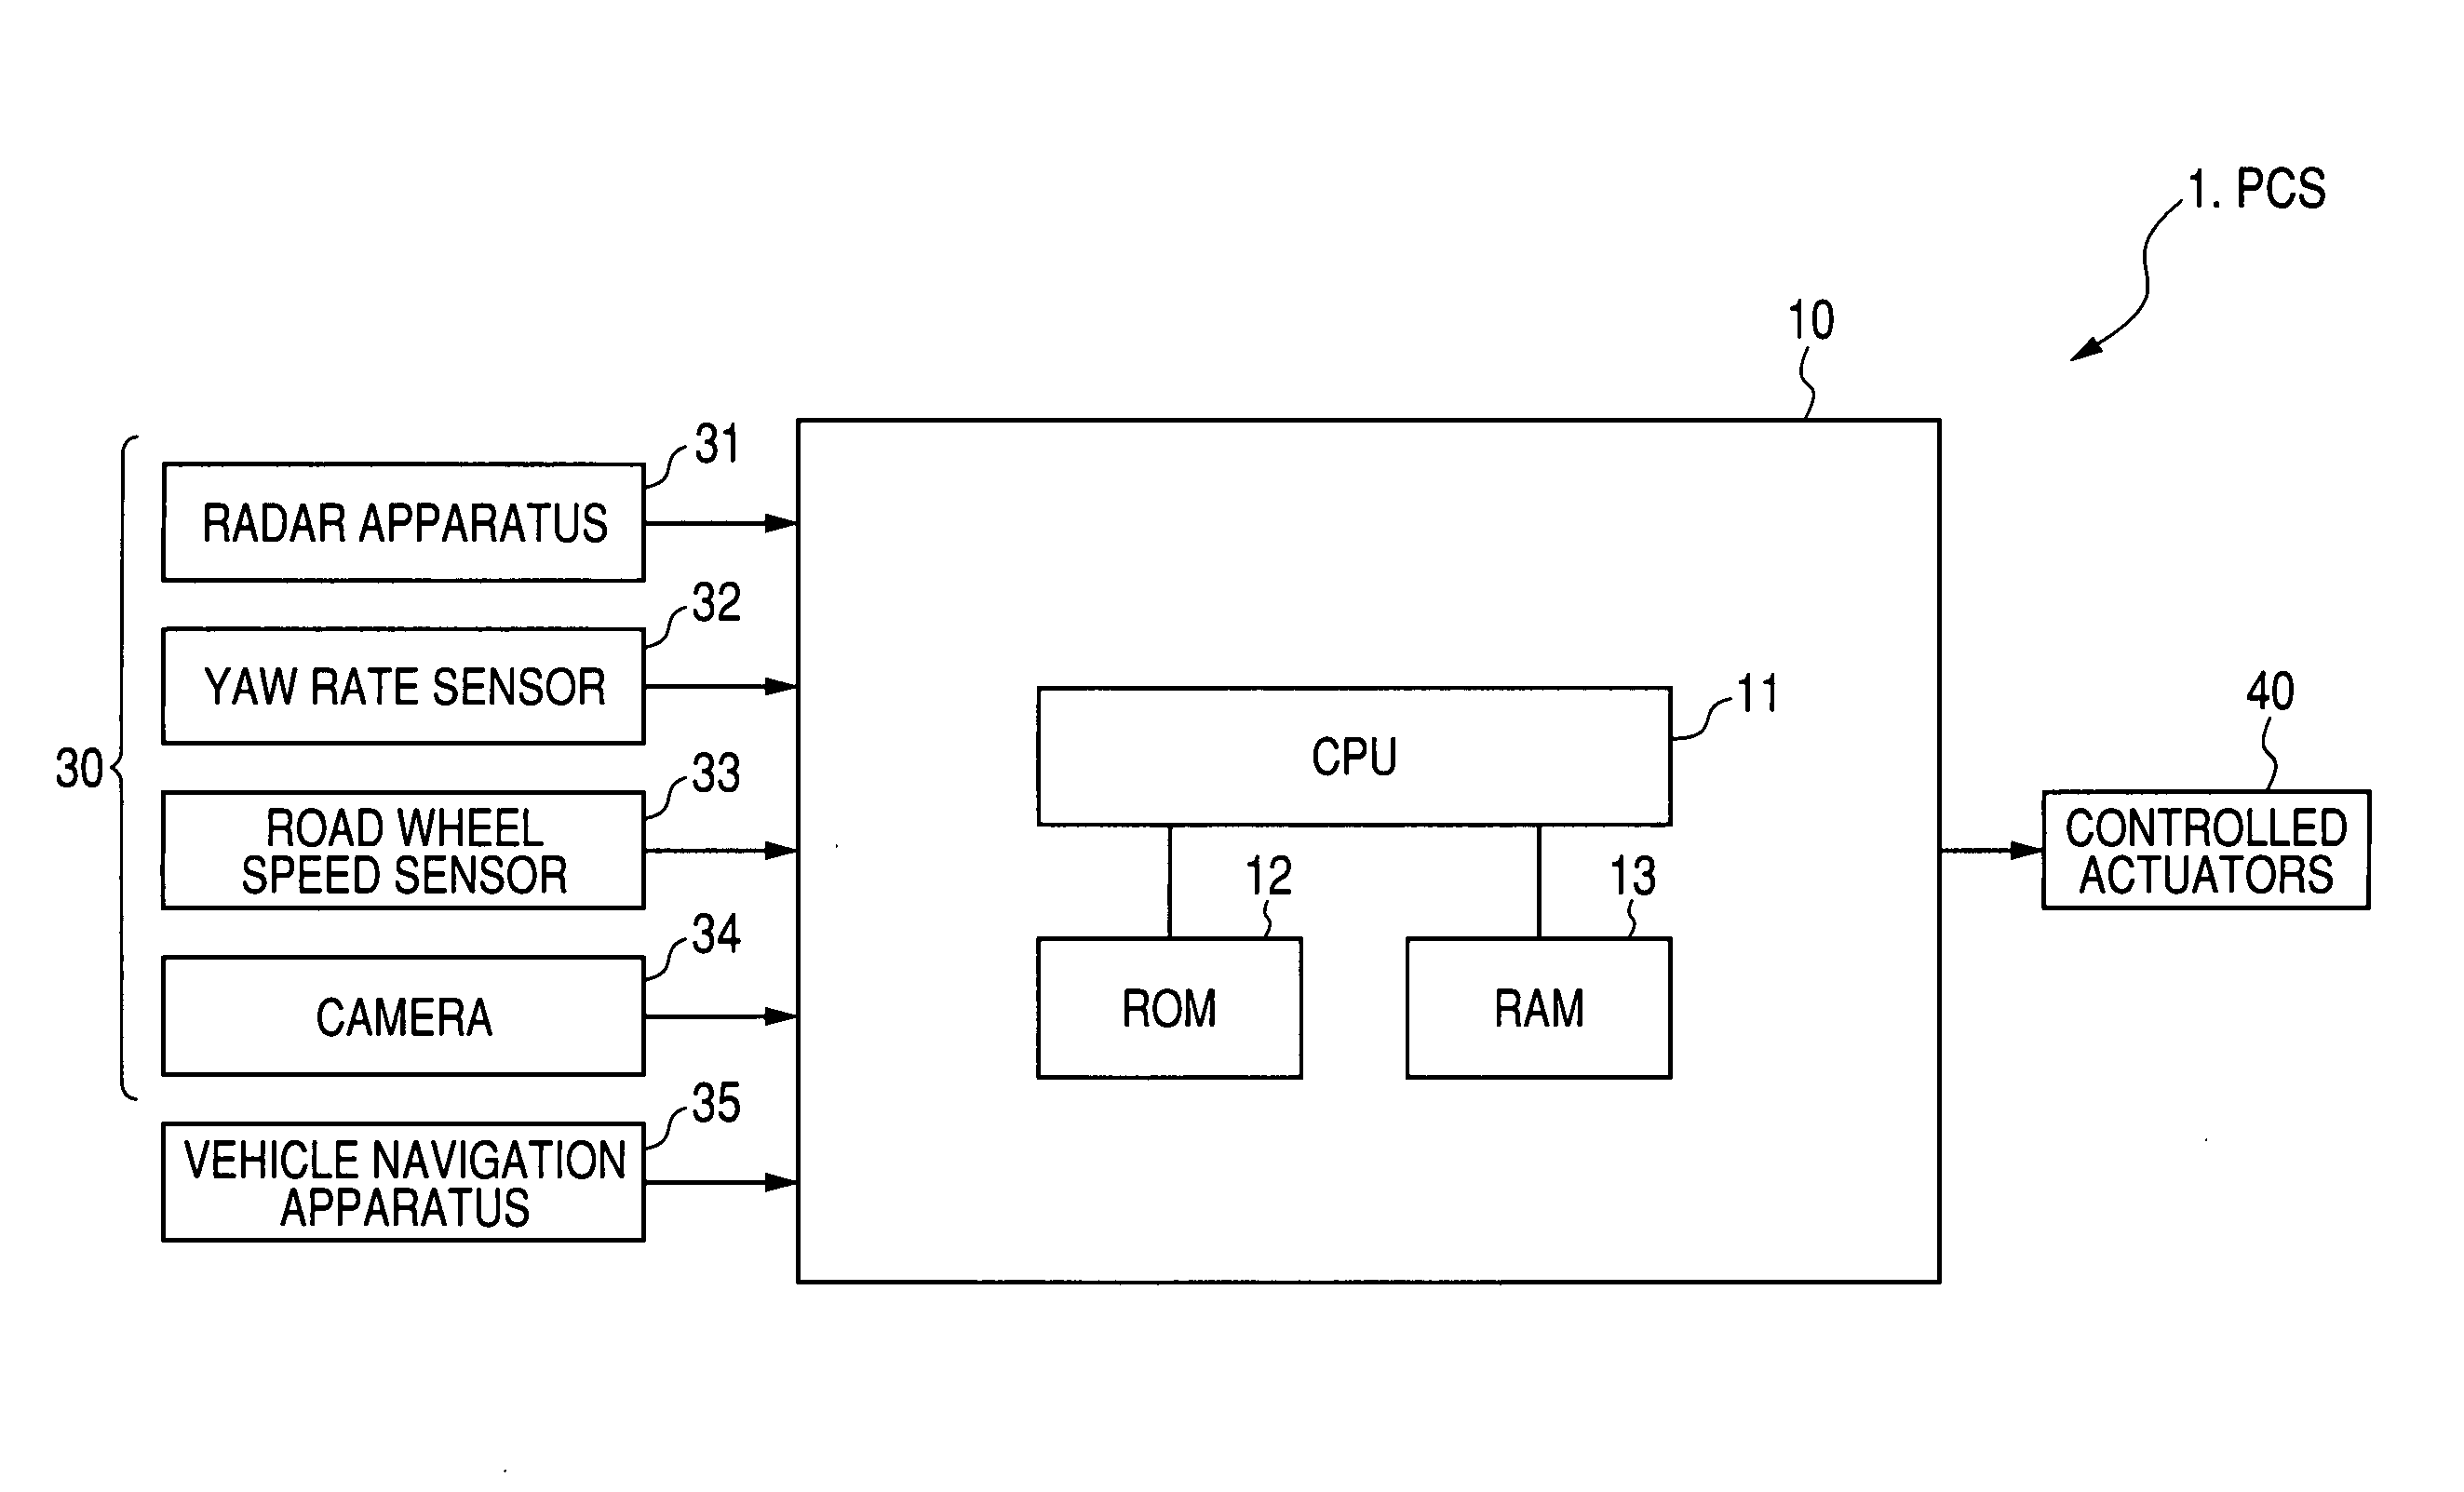 Vehicle-installation person detection apparatus and crash absorption apparatus incorporating the person detection apparatus